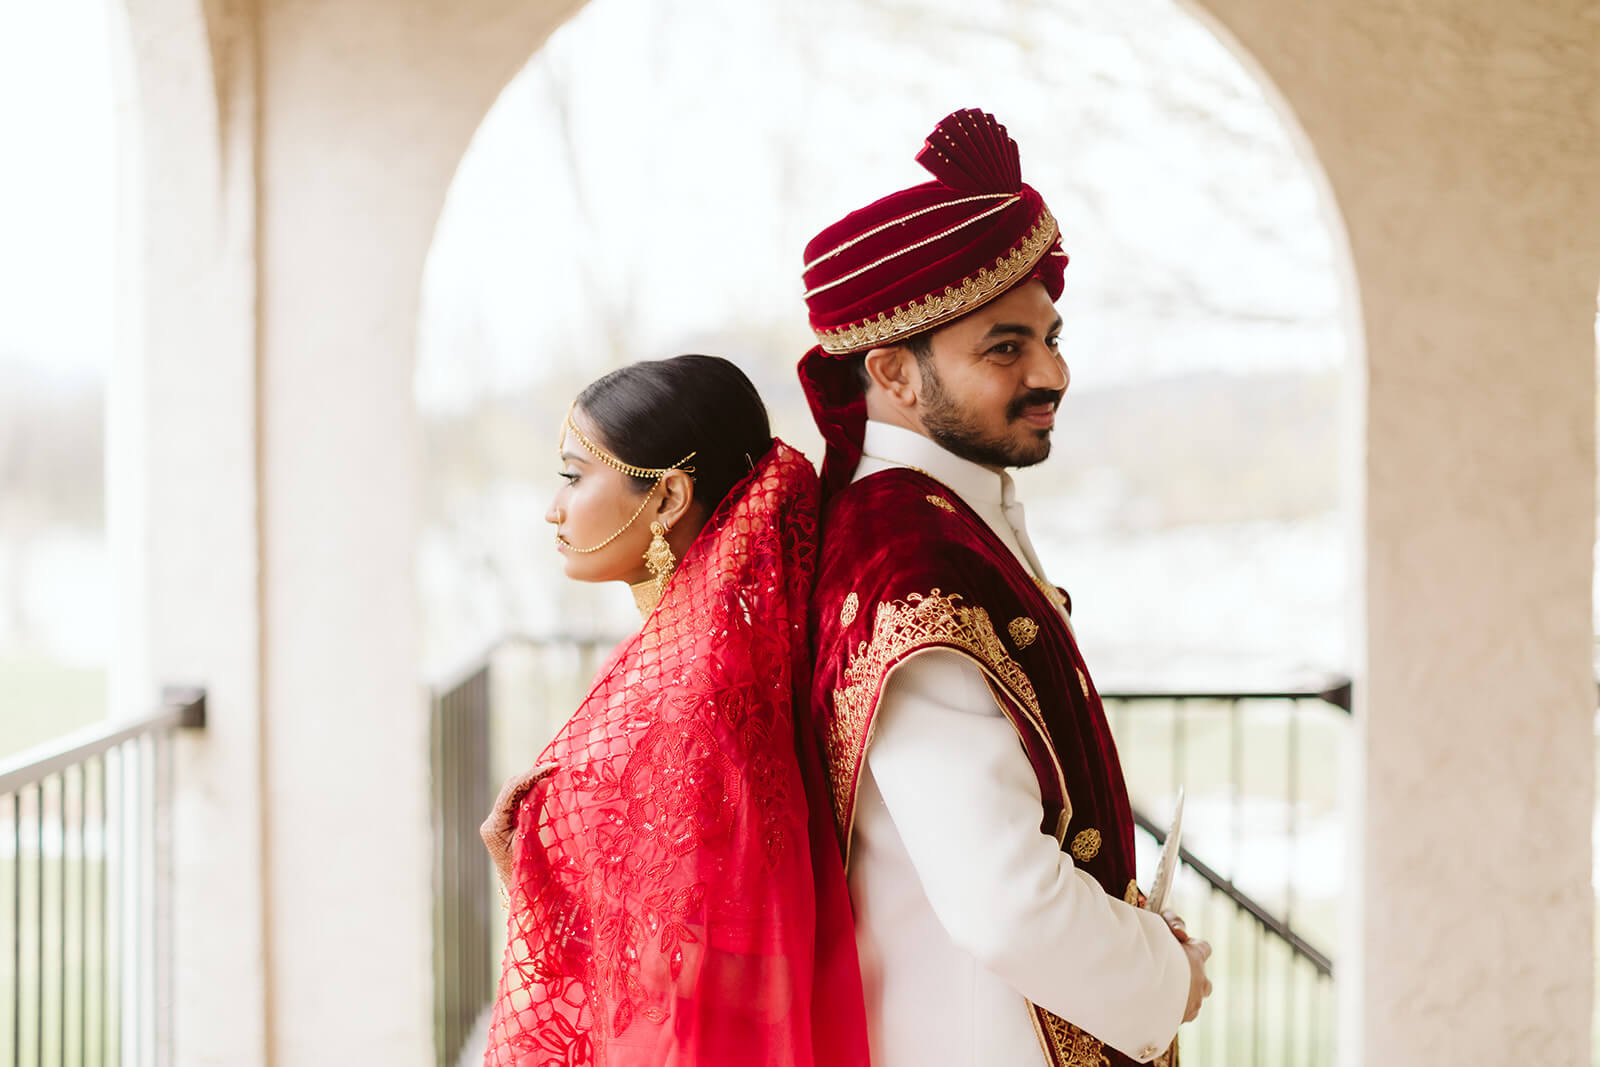 25+ Wholesome Wedding Photoshoot Ideas to Frame Your Love Story